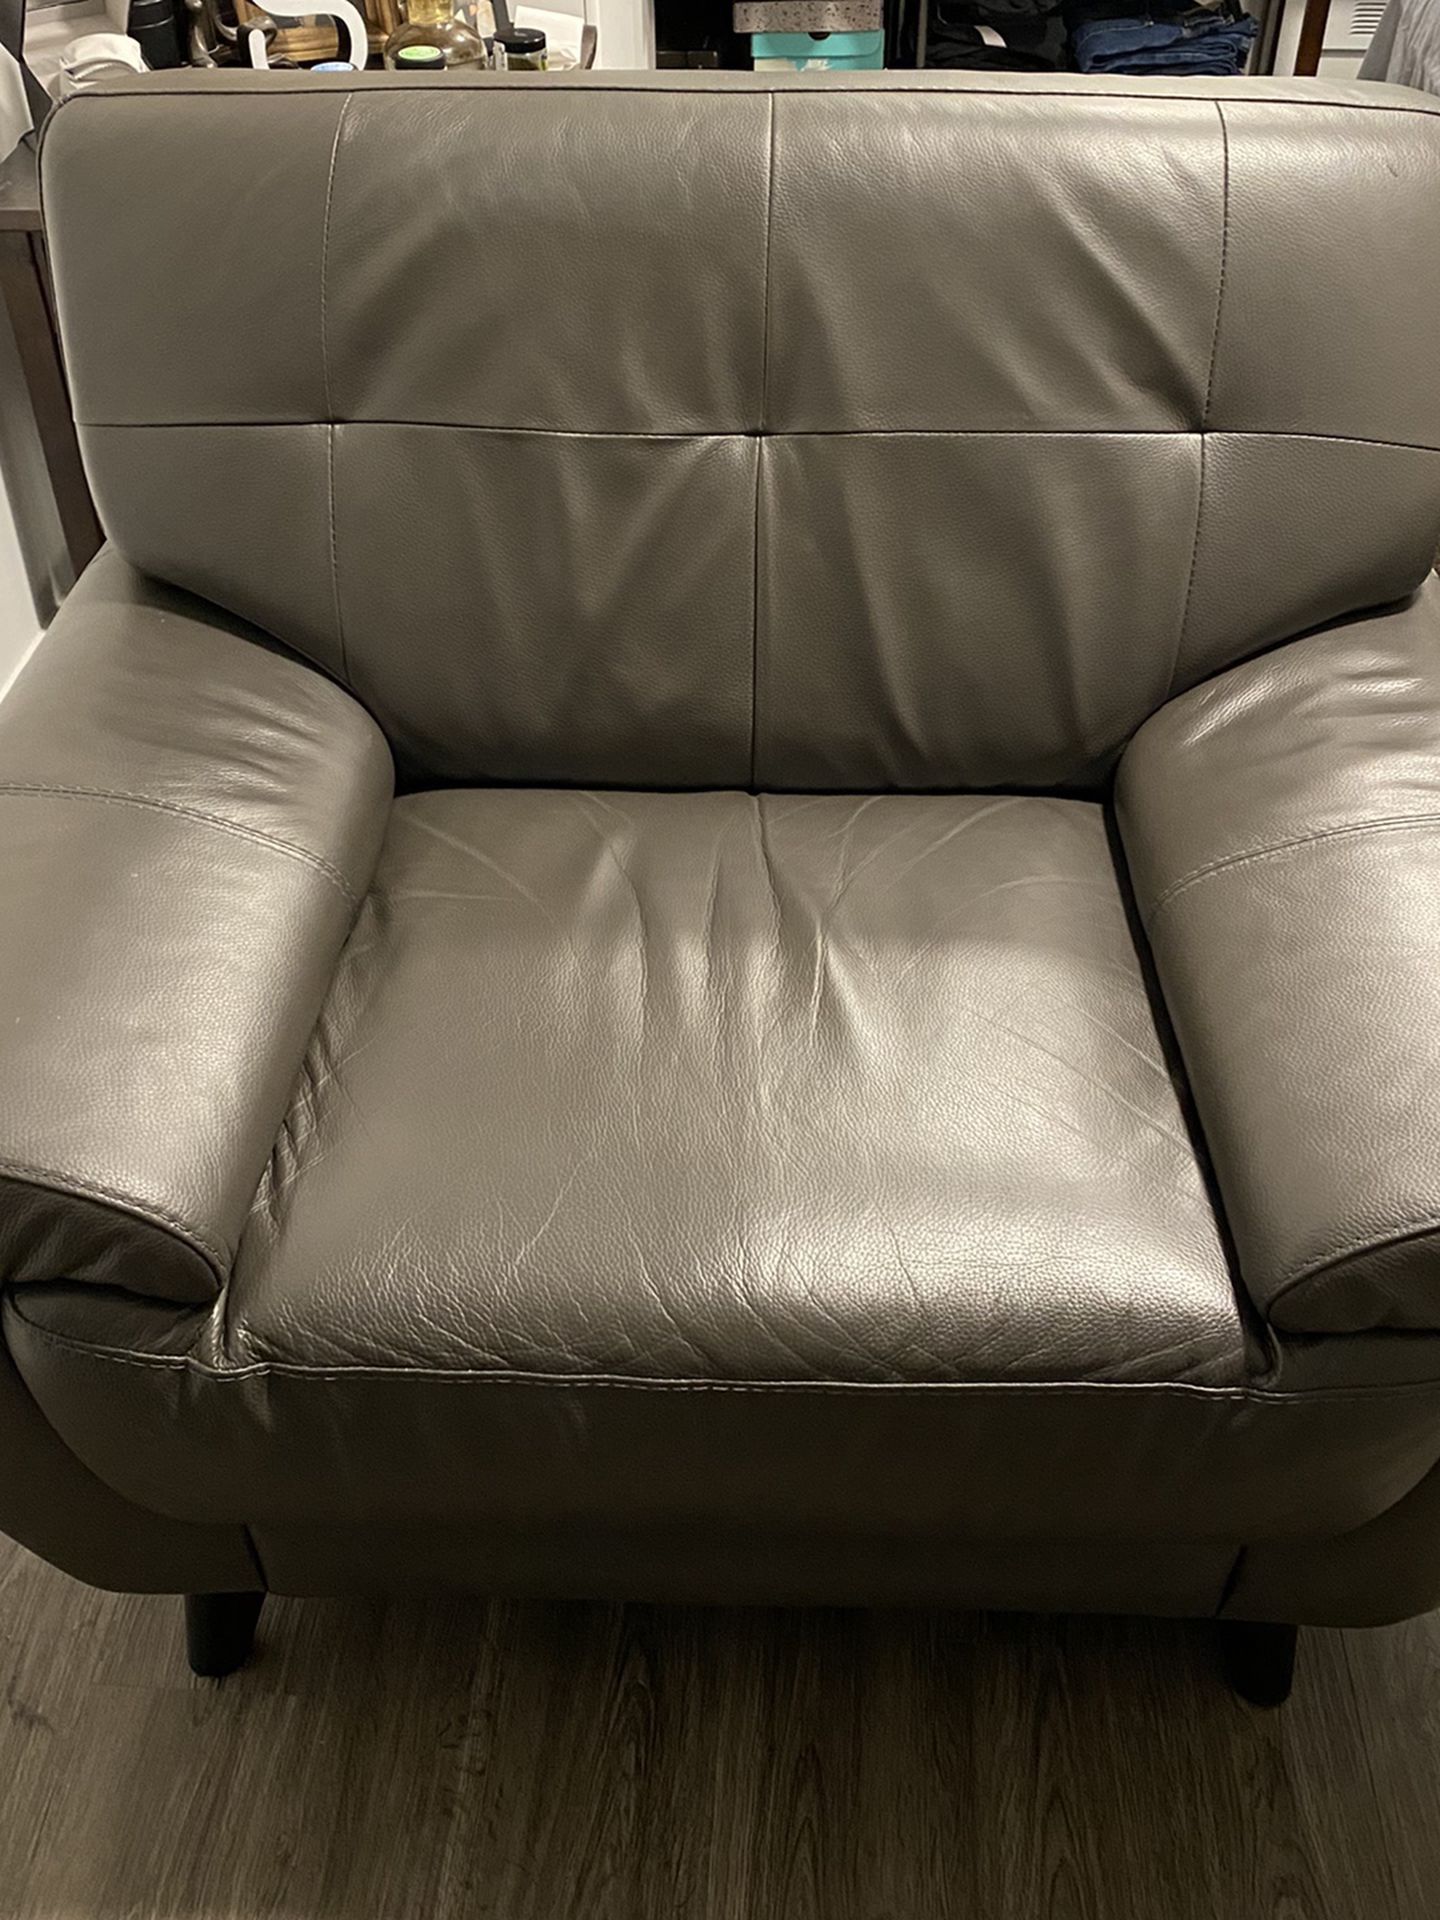 Oversize real leather chair